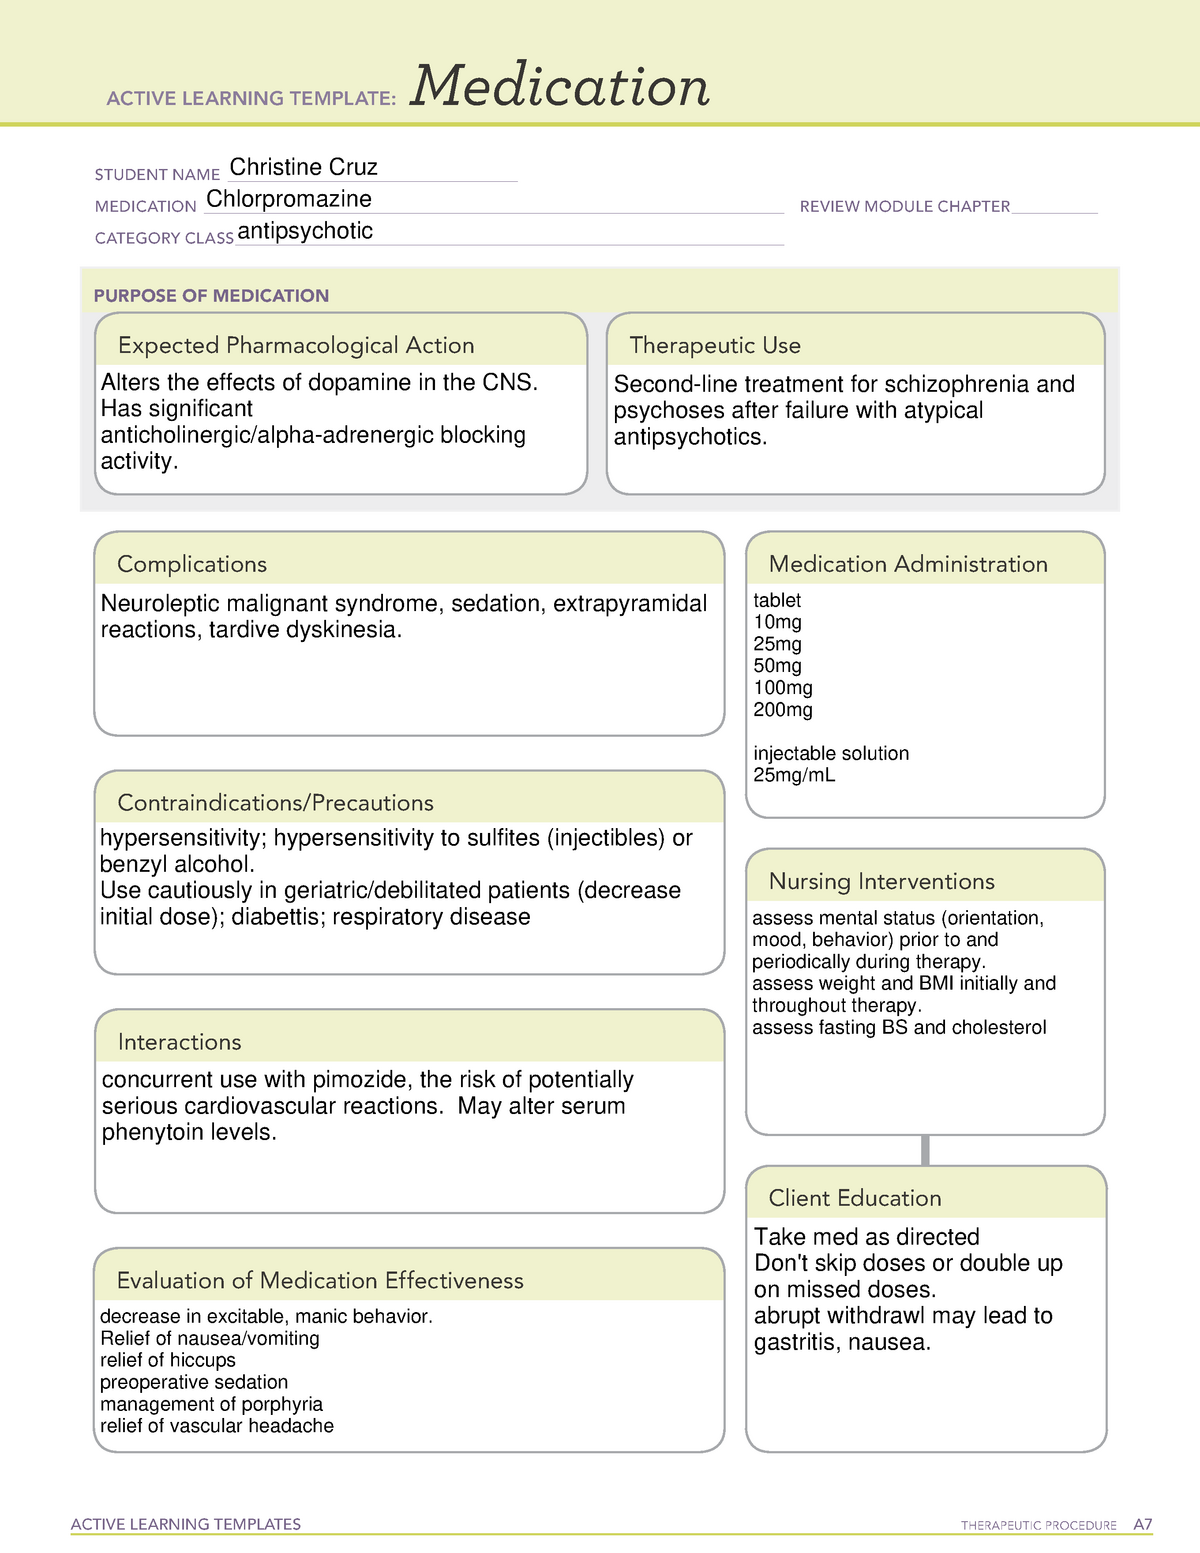 Thorazine Drug Card for ATI Remediation - ACTIVE LEARNING TEMPLATES ...